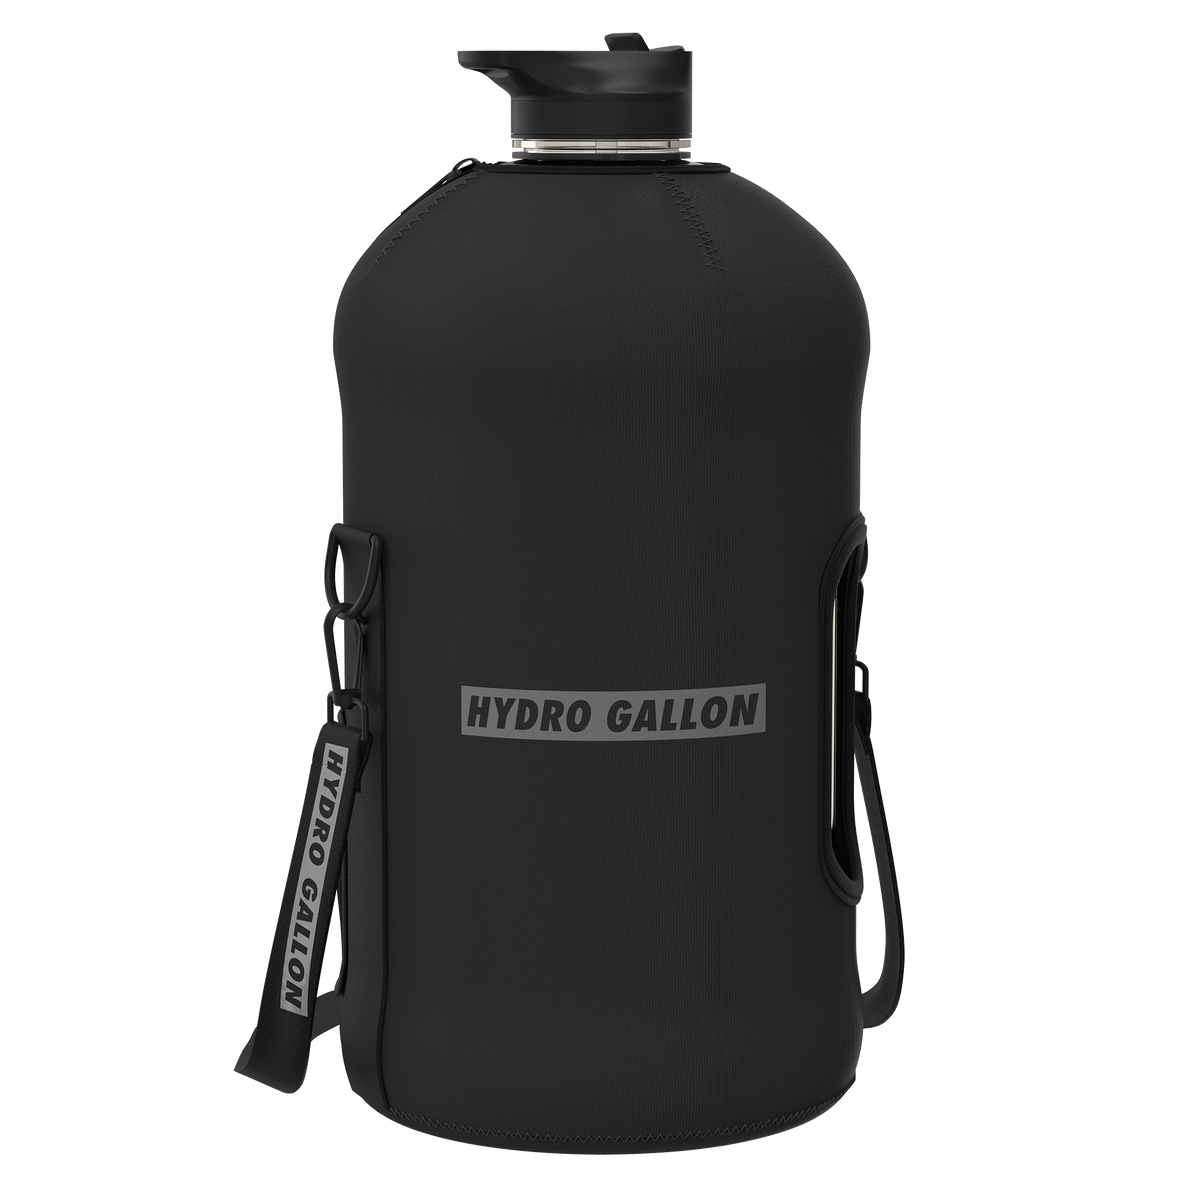 hydro gallon 1 black one gallon water bottle jug straw spout lid sleeve shoulder carrying strap pocket for phone keys motivational time markers insulated bpa free leakproof side handle